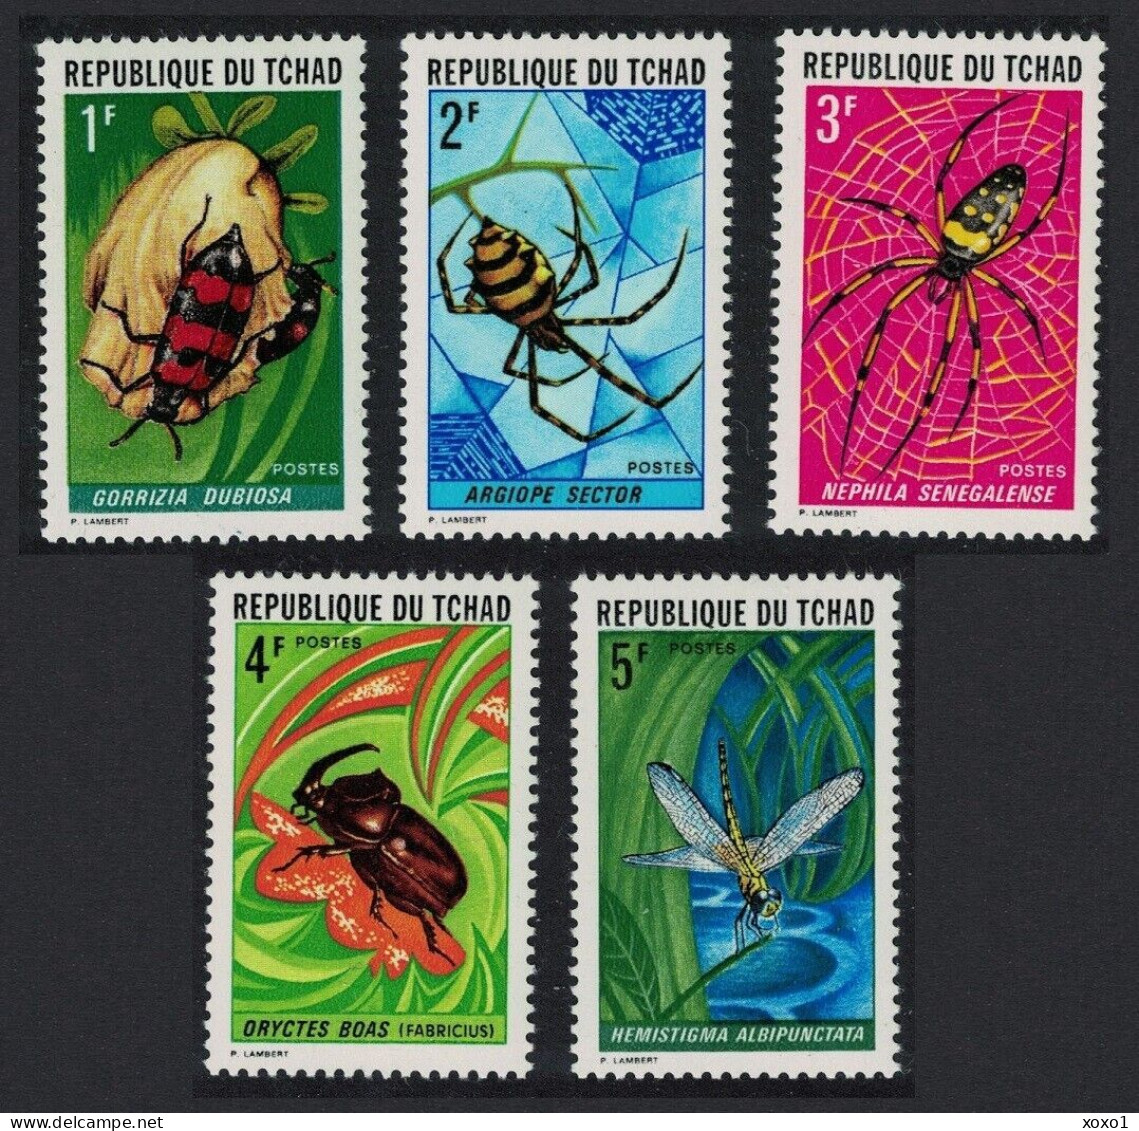 Chad 1972 MiNr. 510 - 514  Tschad Insects Spiders Bugs 5v MNH** 16,00 € - Spiders